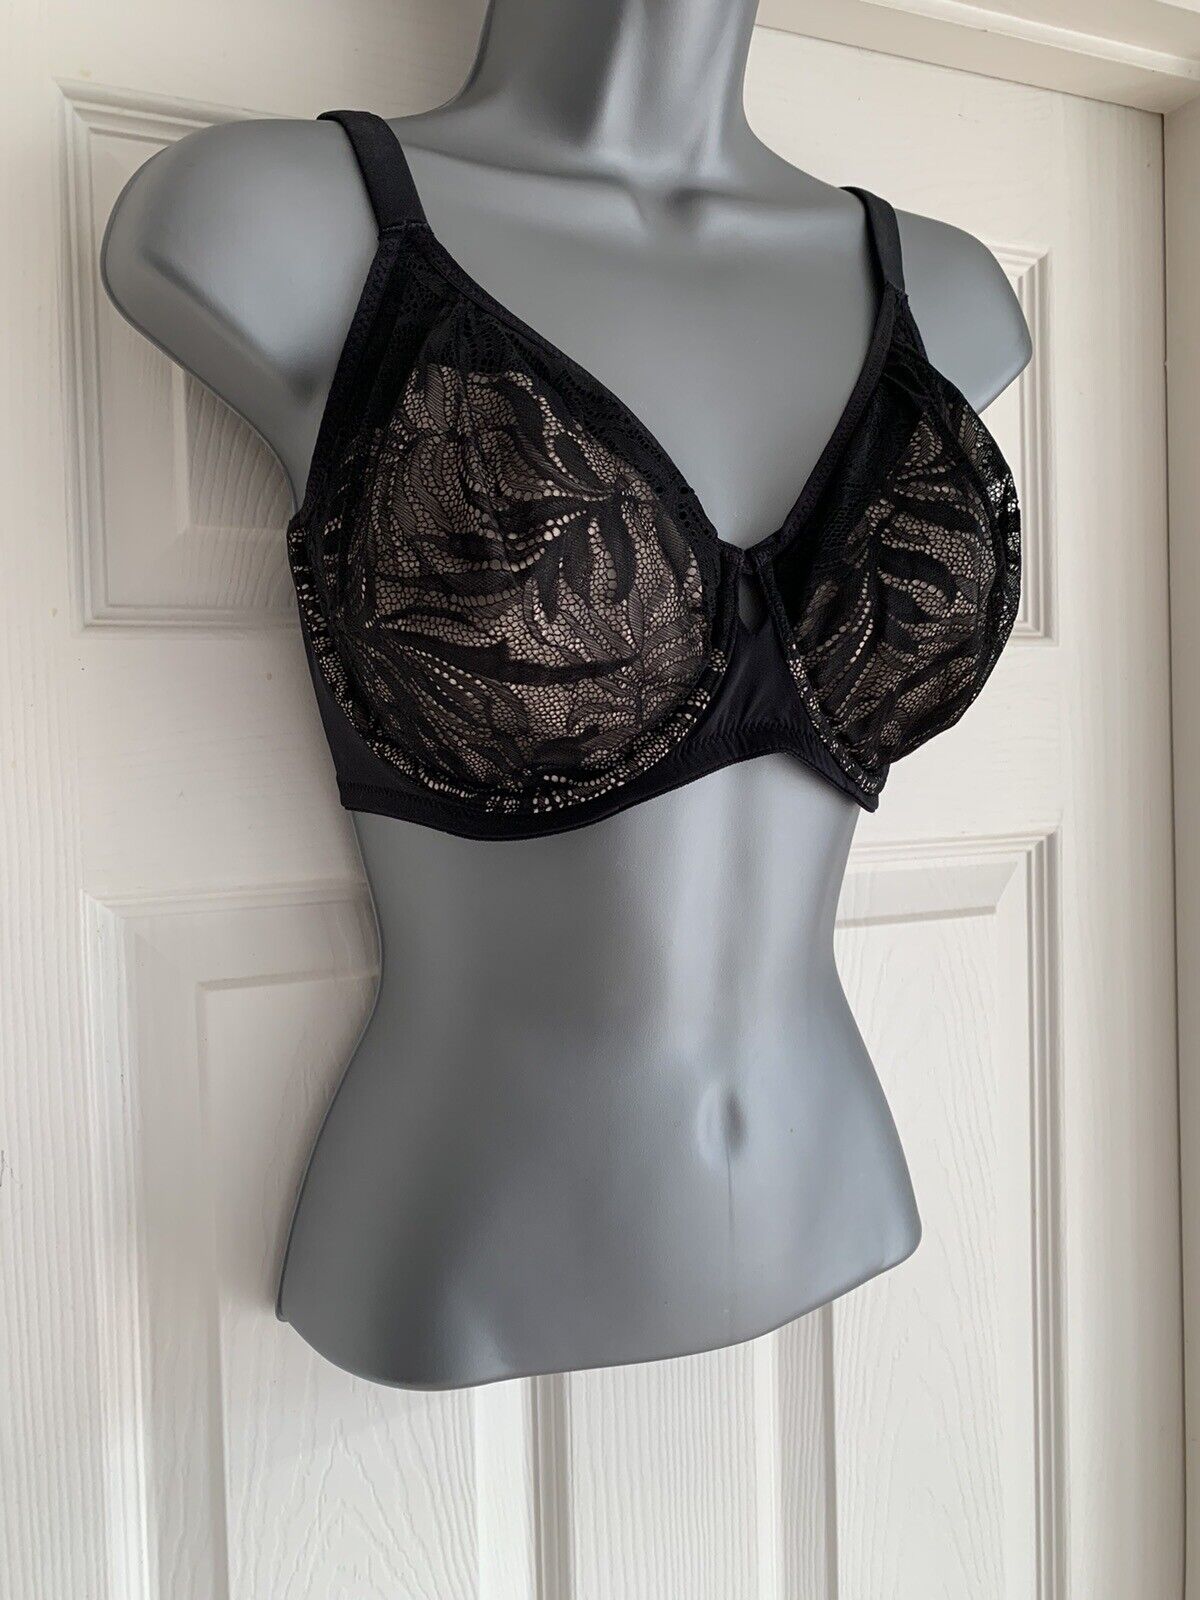 EX M*S Black Youthful Lift Non-Padded Full Cup Bra in Sizes 32F or 32G